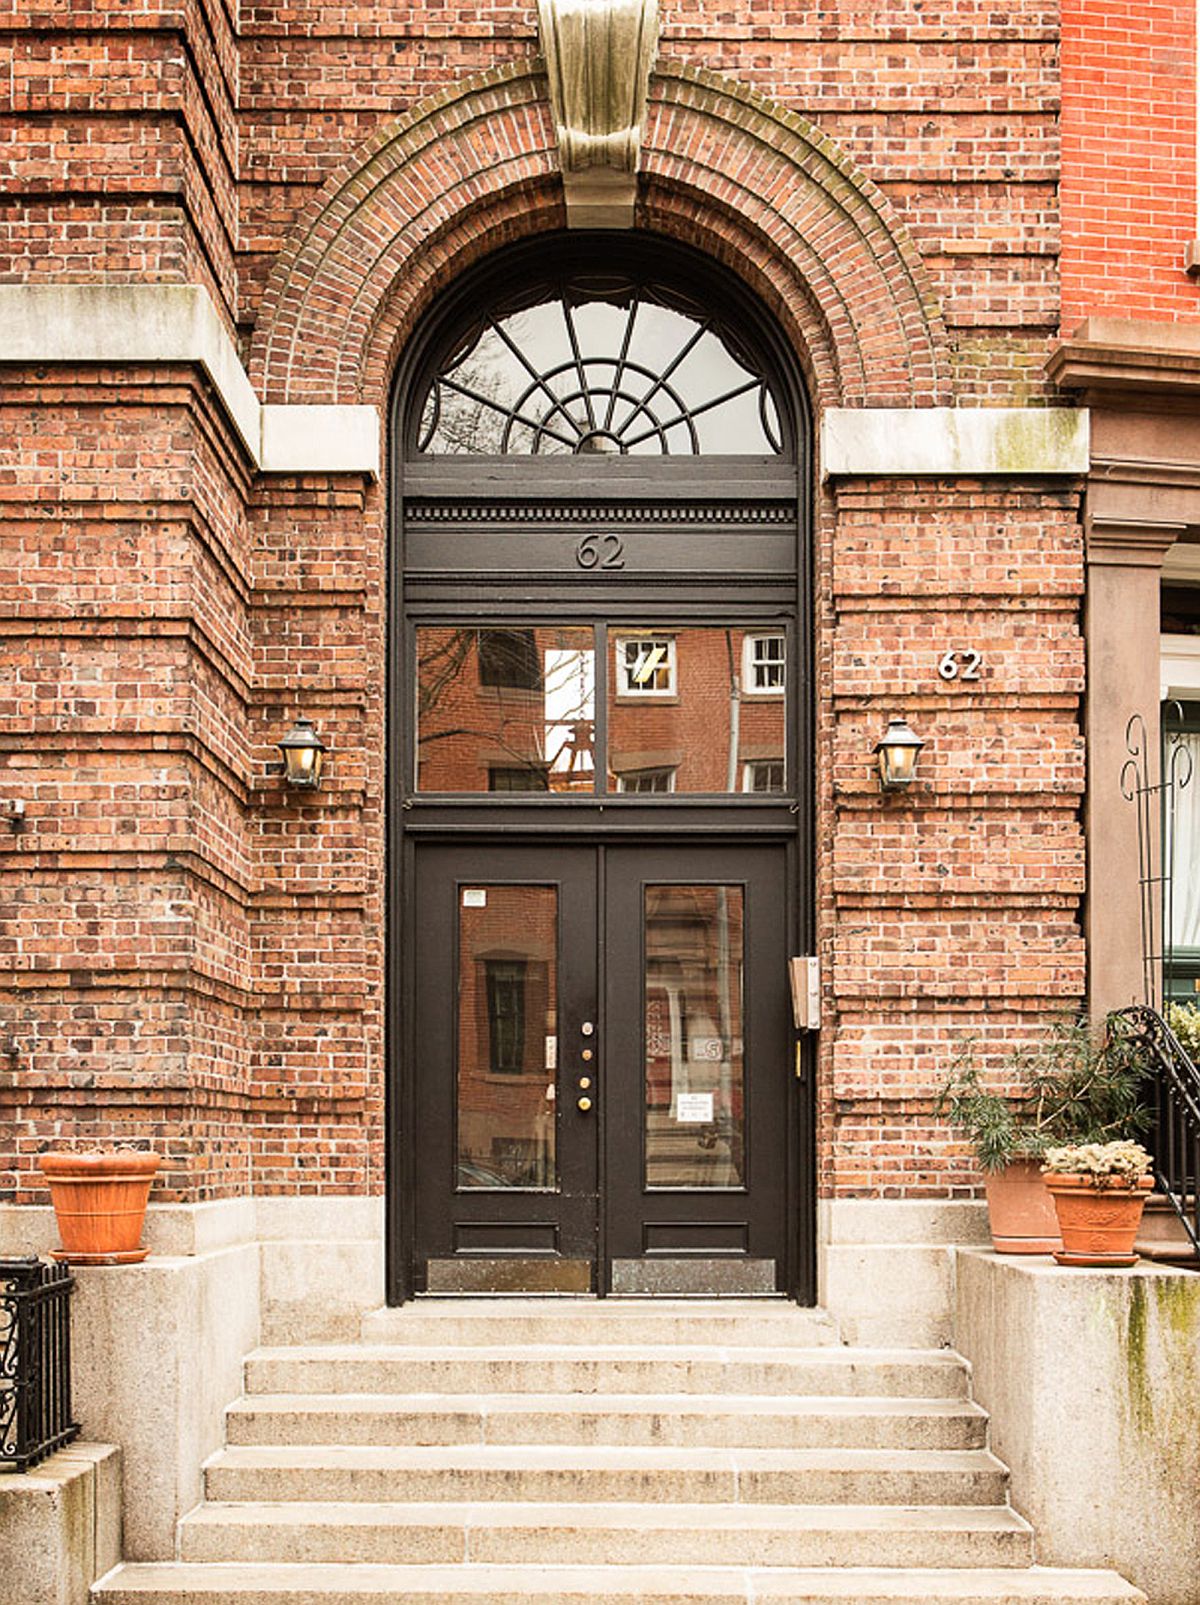 Entrance to renovated YMCA building that holds the loft apartment